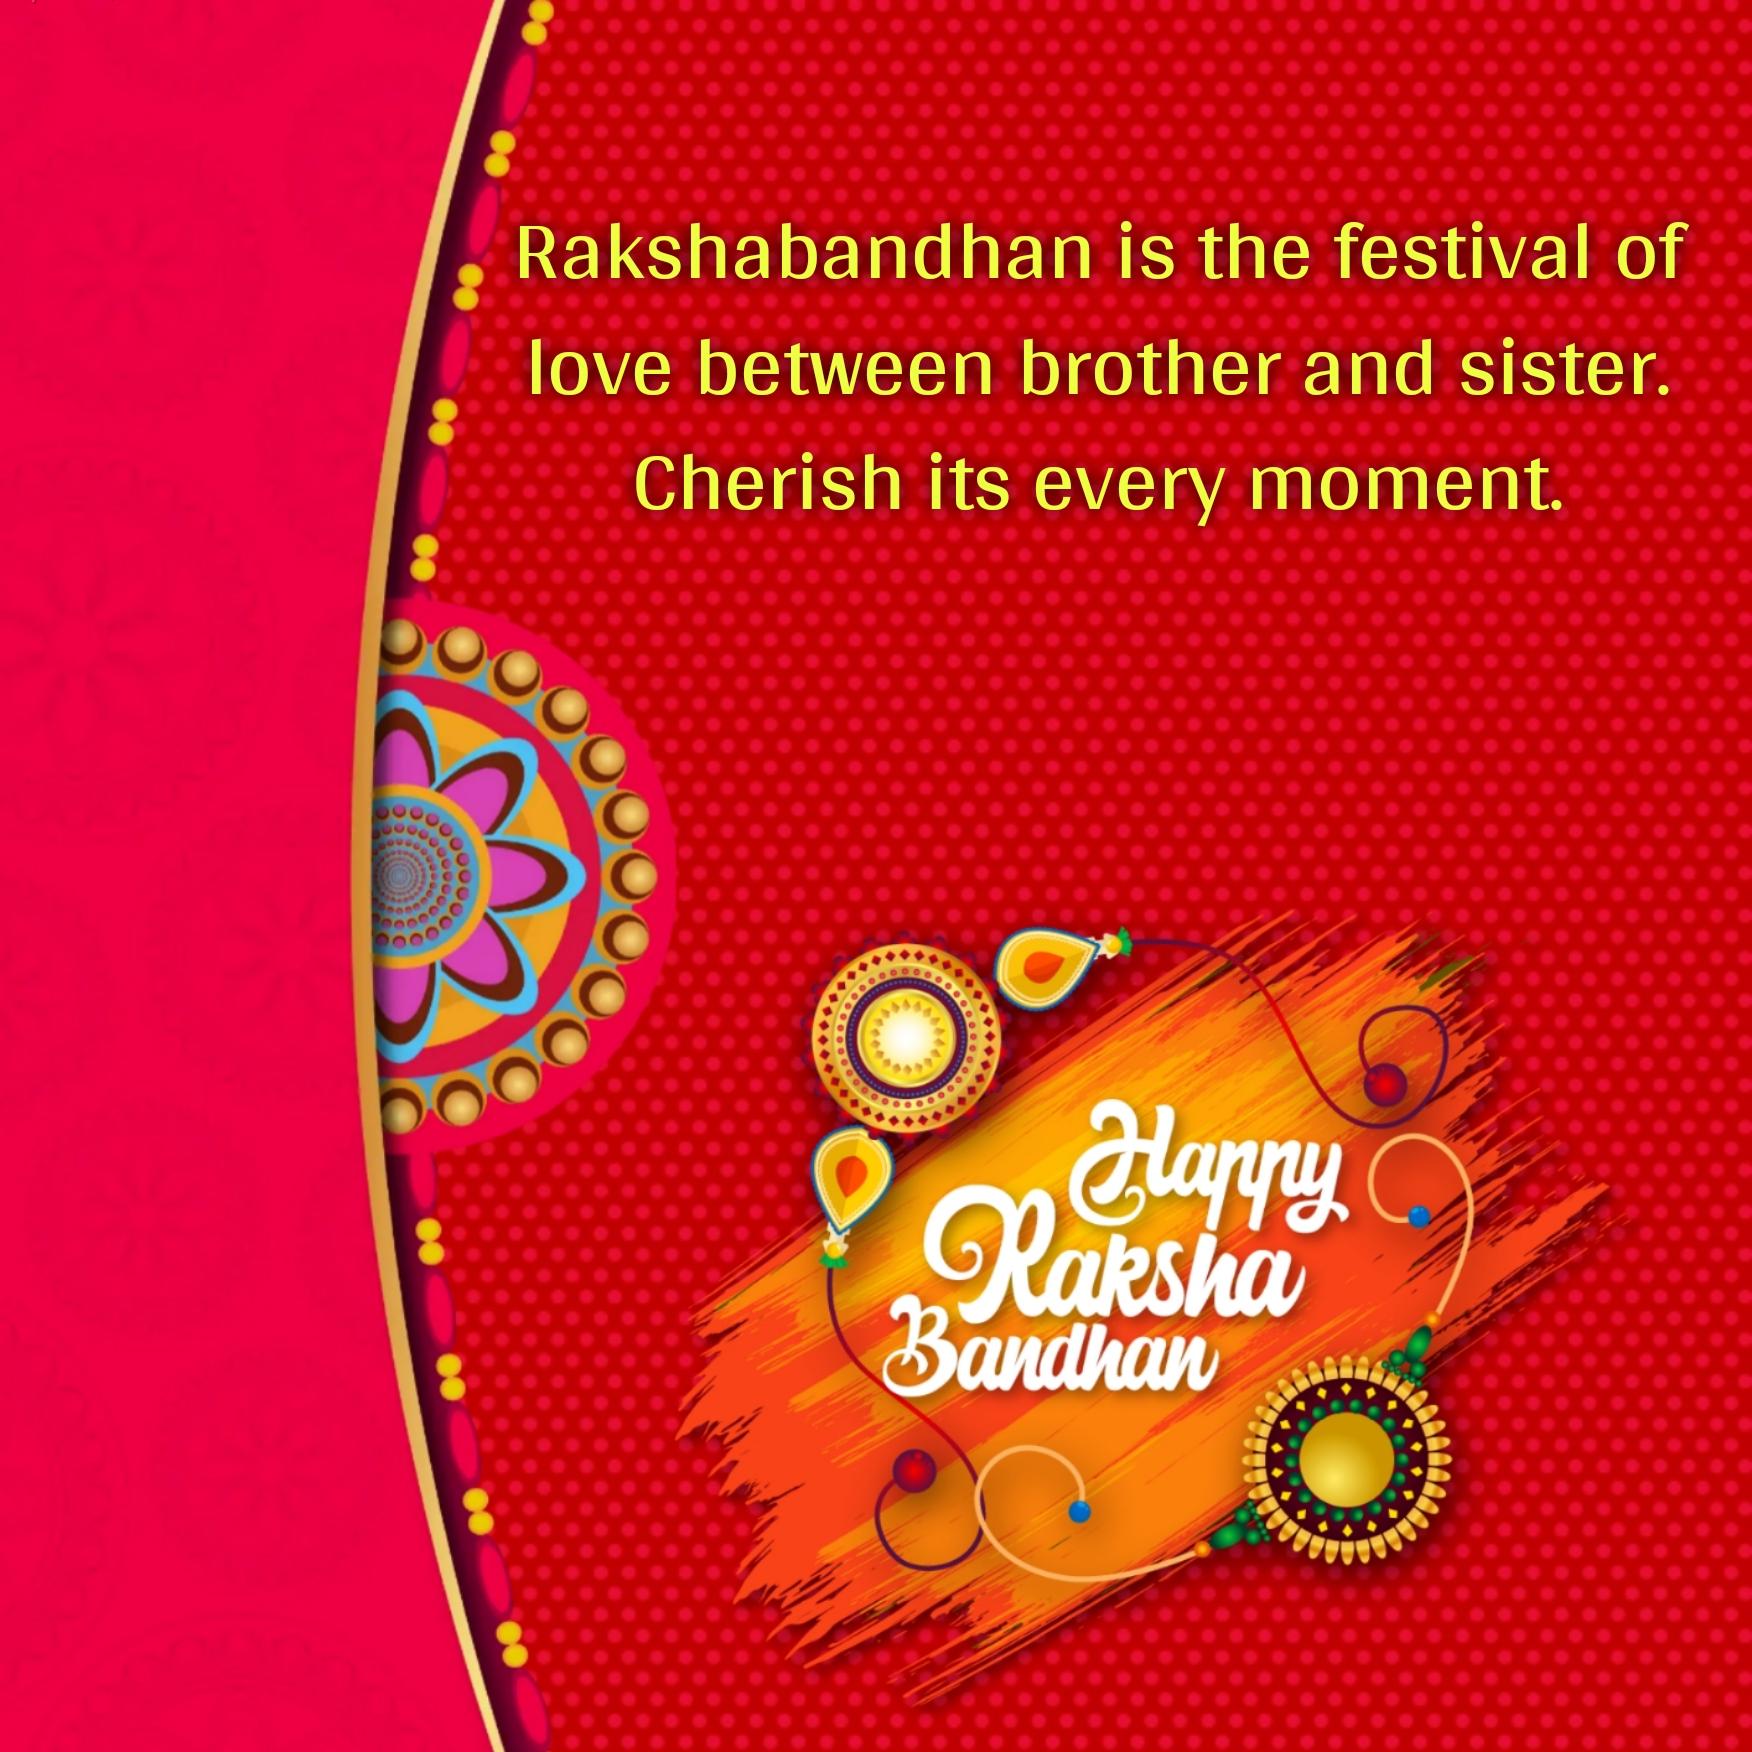 Rakshabandhan is the festival of love between brother and sister